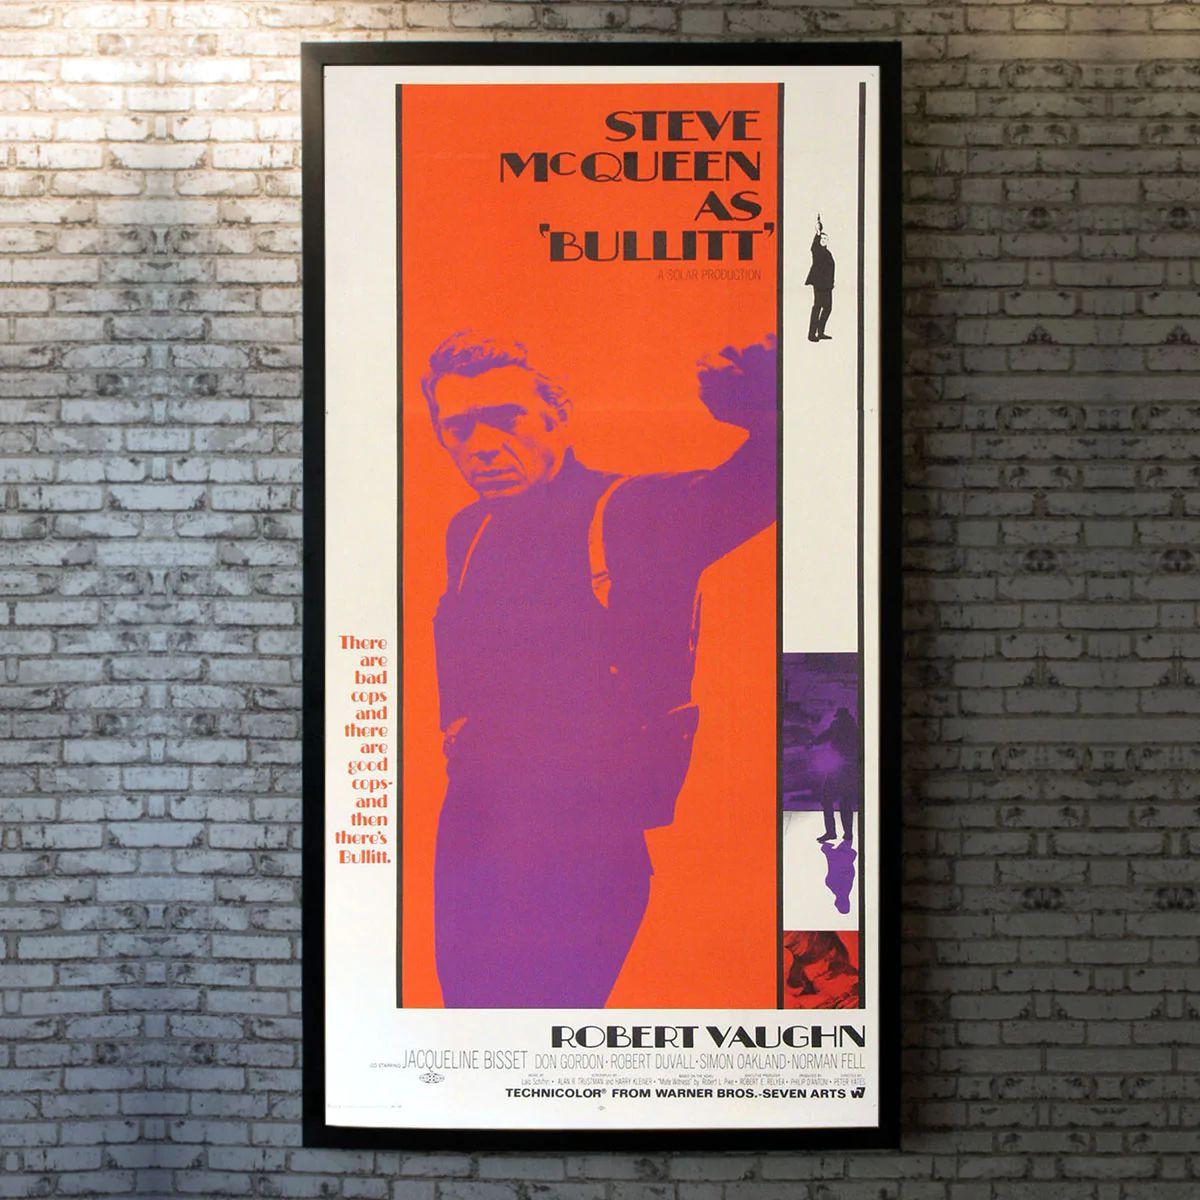 Bullitt, Unframed Poster, 1968

Three Sheet (41 x 81 inches). An all-guts, no-glory San Francisco cop becomes determined to find the underworld kingpin that killed the witness in his protection.

Year: 1968
Nationality: United